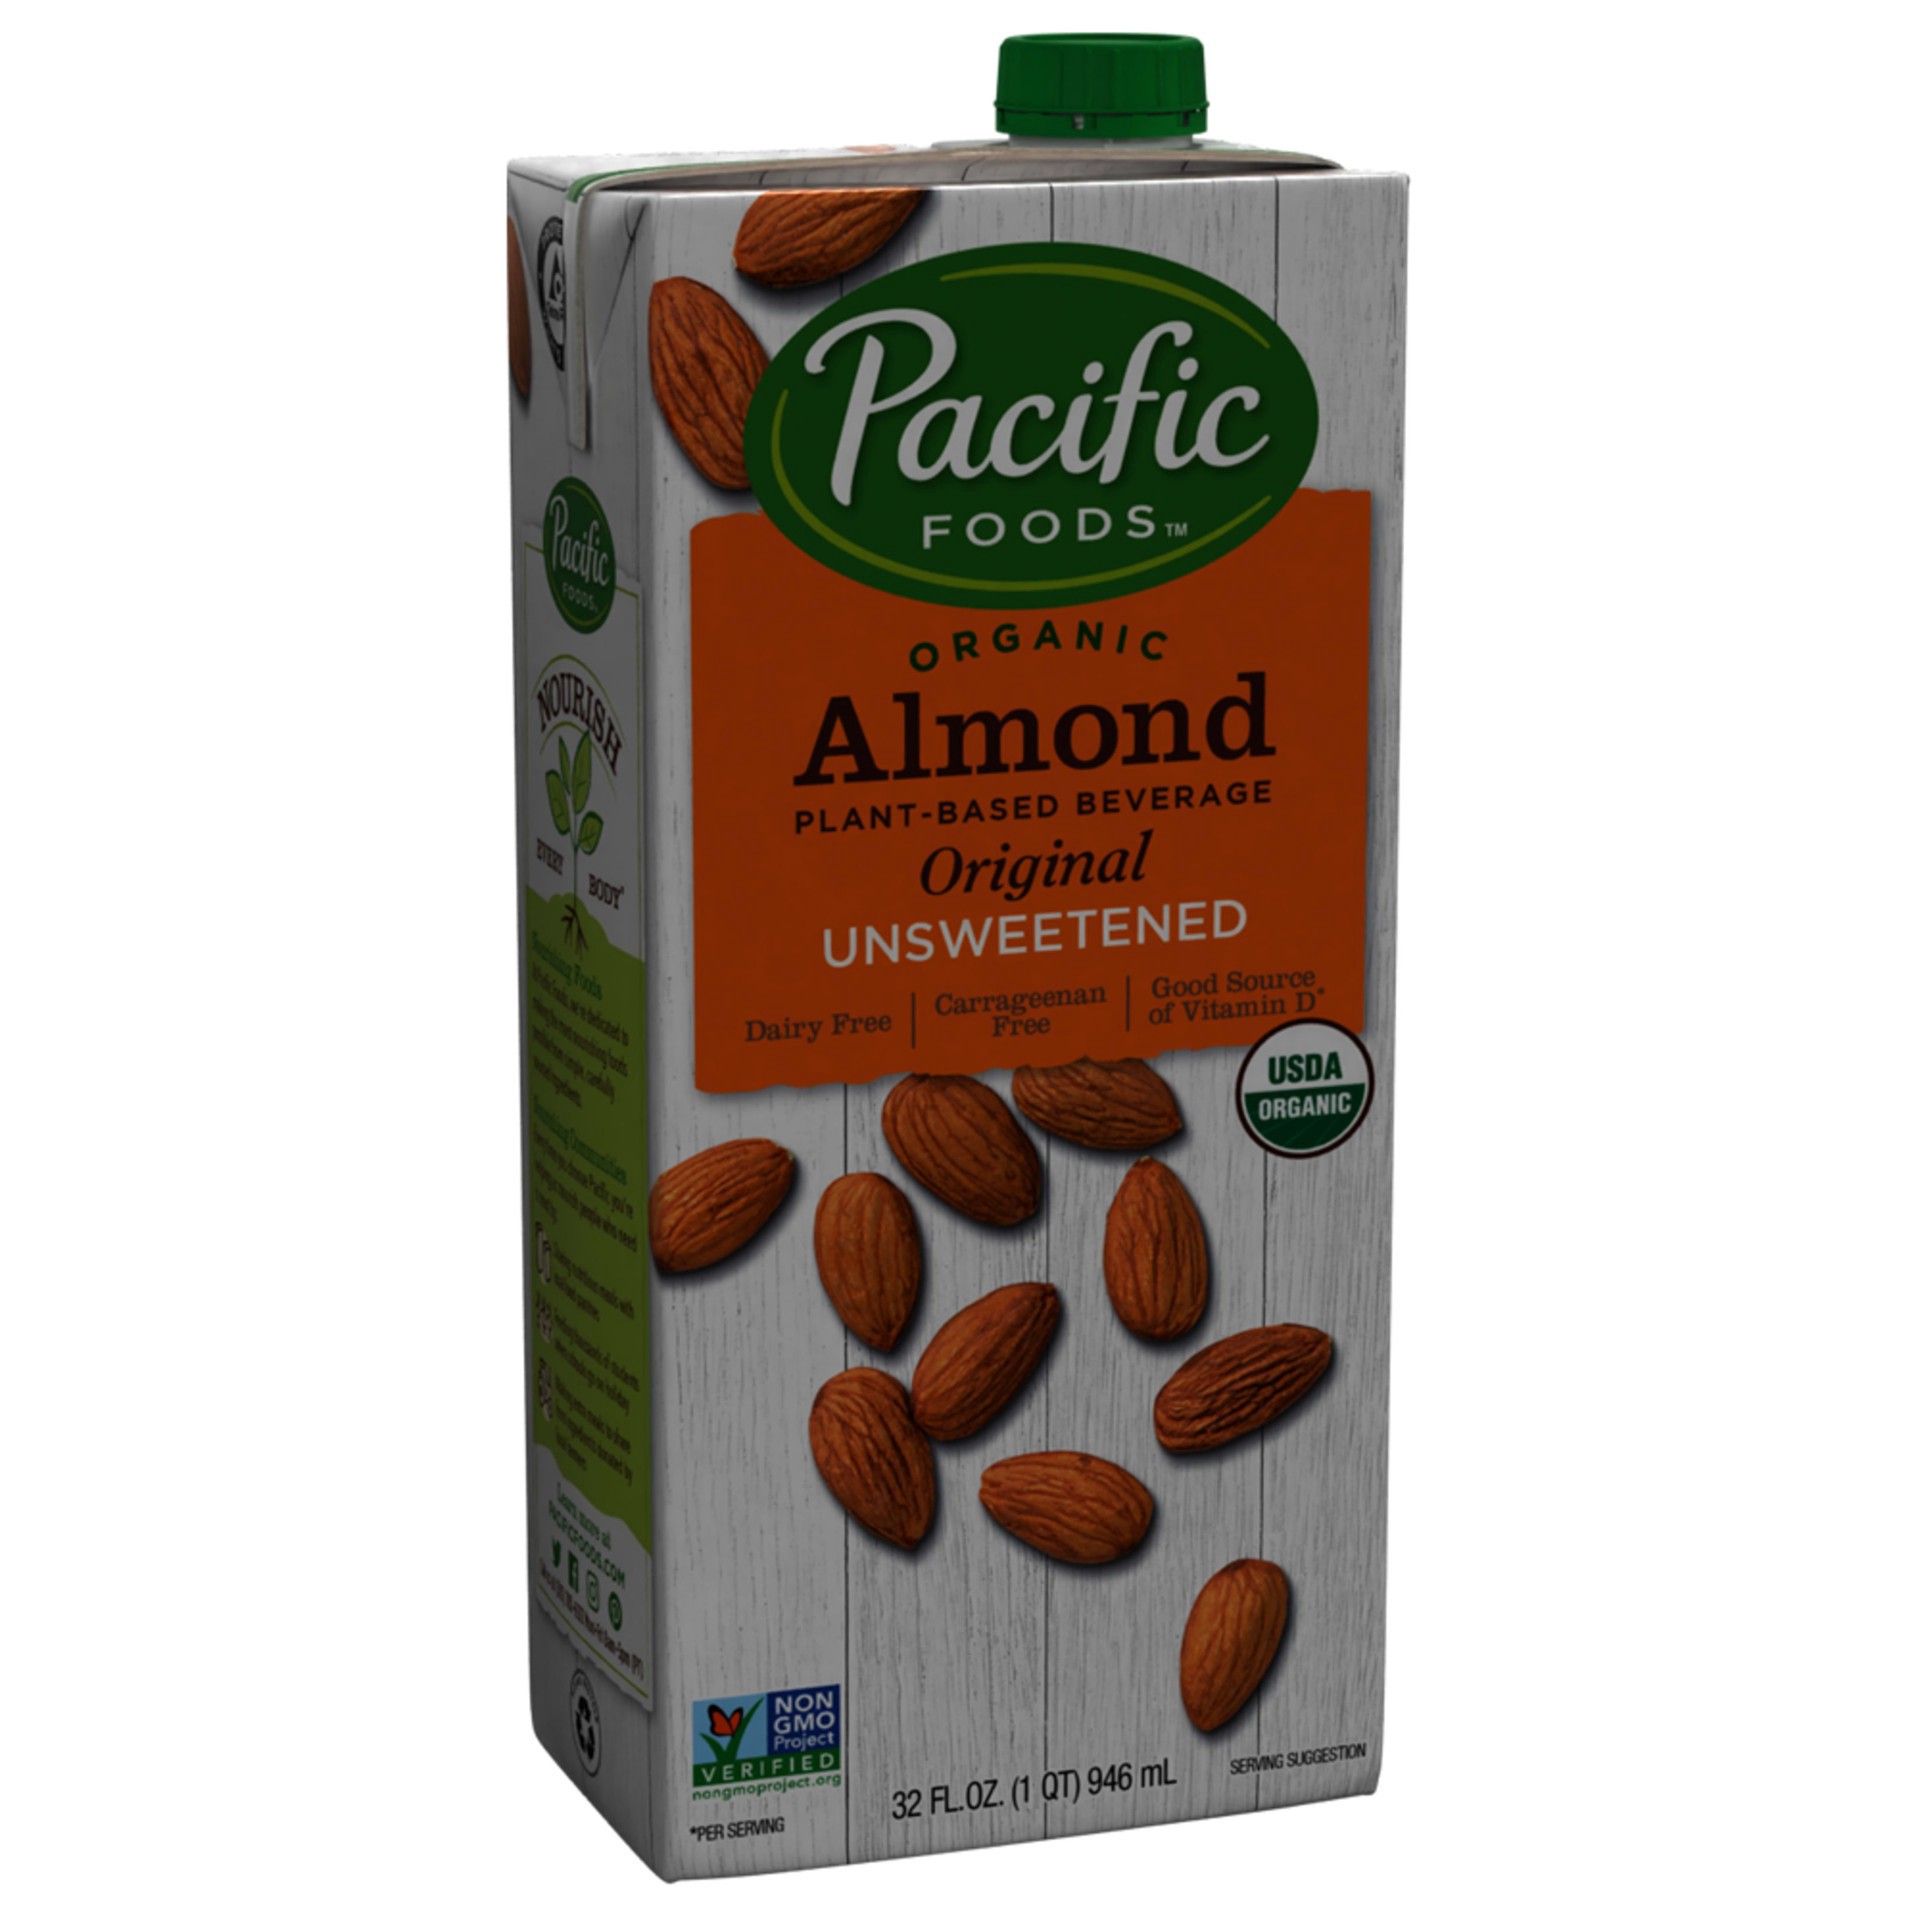 slide 1 of 5, Pacific Foods Organic Unsweetened Almond Original Plant-Based Beverage, 1 qt